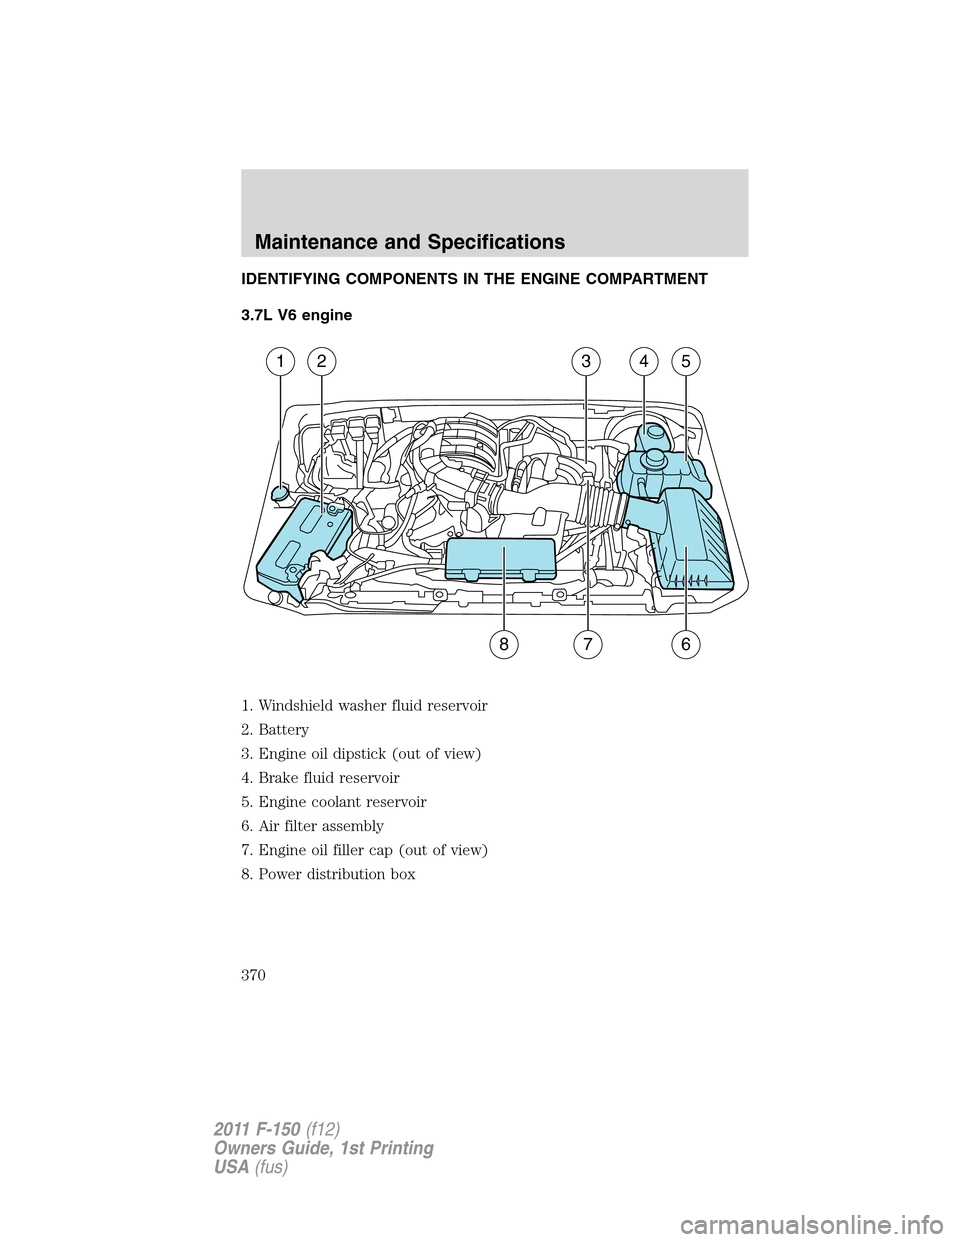 FORD F150 2011 12.G Owners Manual IDENTIFYING COMPONENTS IN THE ENGINE COMPARTMENT
3.7L V6 engine
1. Windshield washer fluid reservoir
2. Battery
3. Engine oil dipstick (out of view)
4. Brake fluid reservoir
5. Engine coolant reservoi